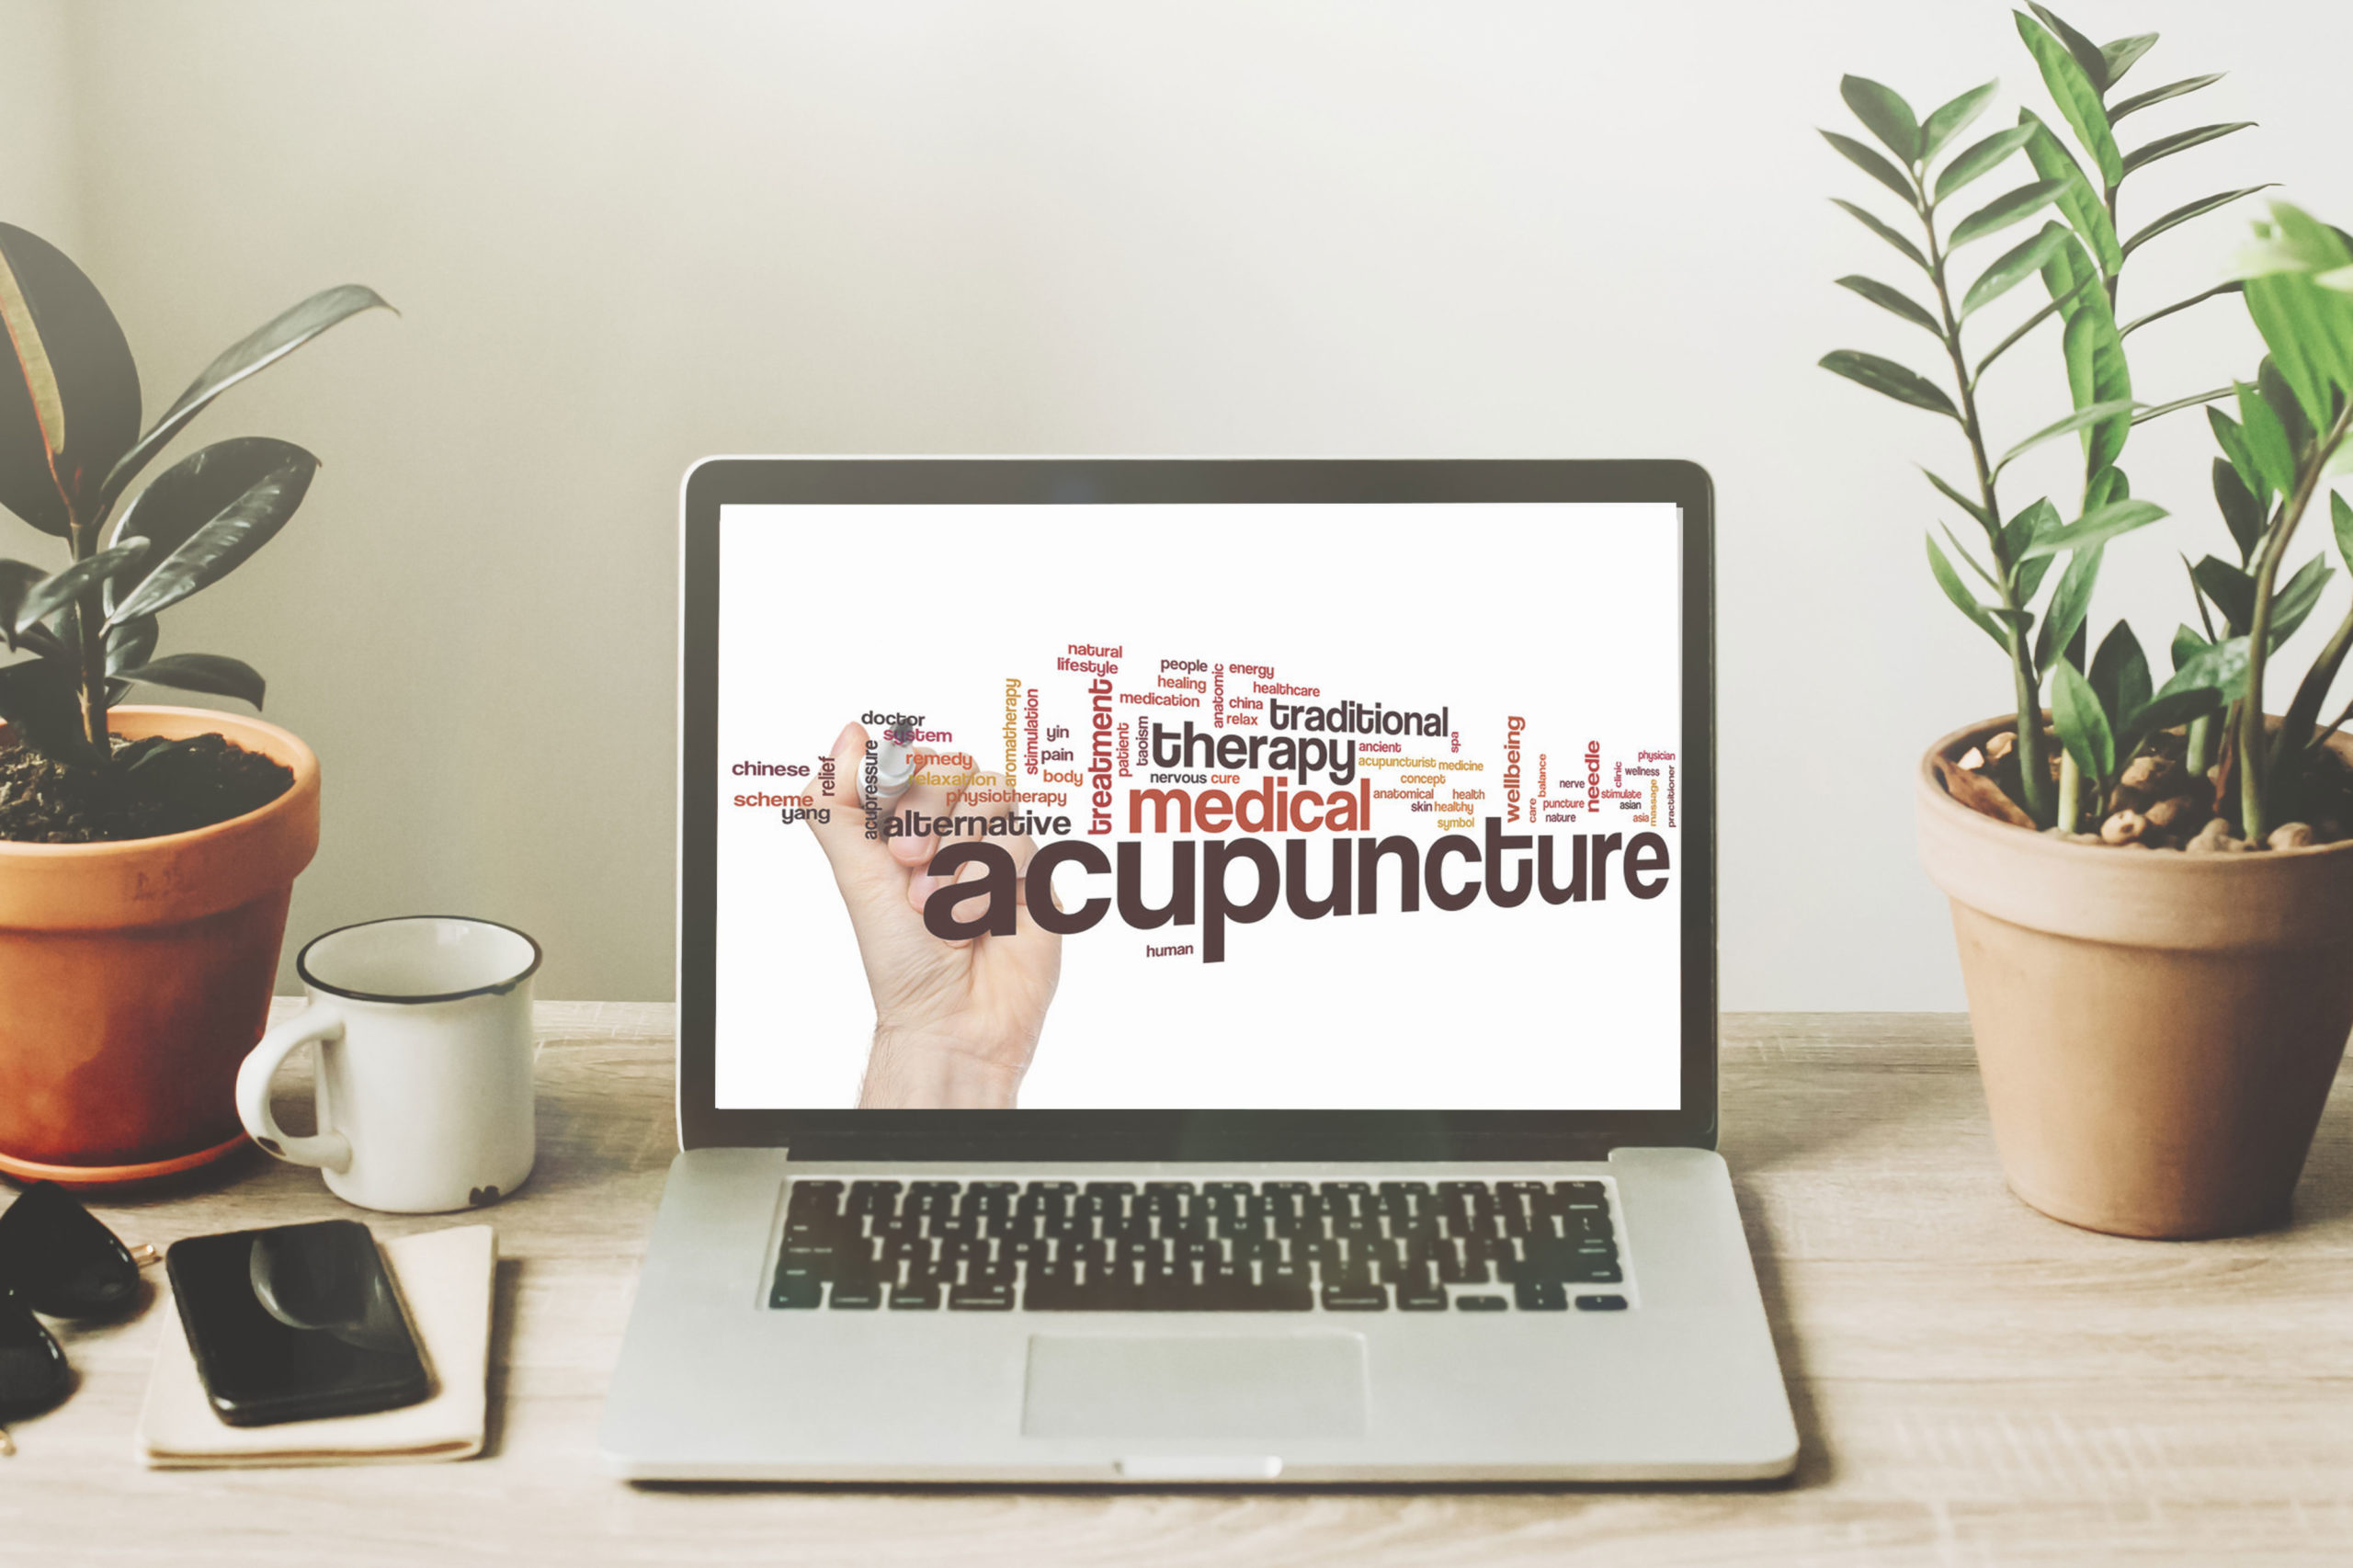 HOW ACUPUNCTURE HELPS TREAT BACK PAIN AND SCIATICA WITHOUT MEDICATION OR SURGERY